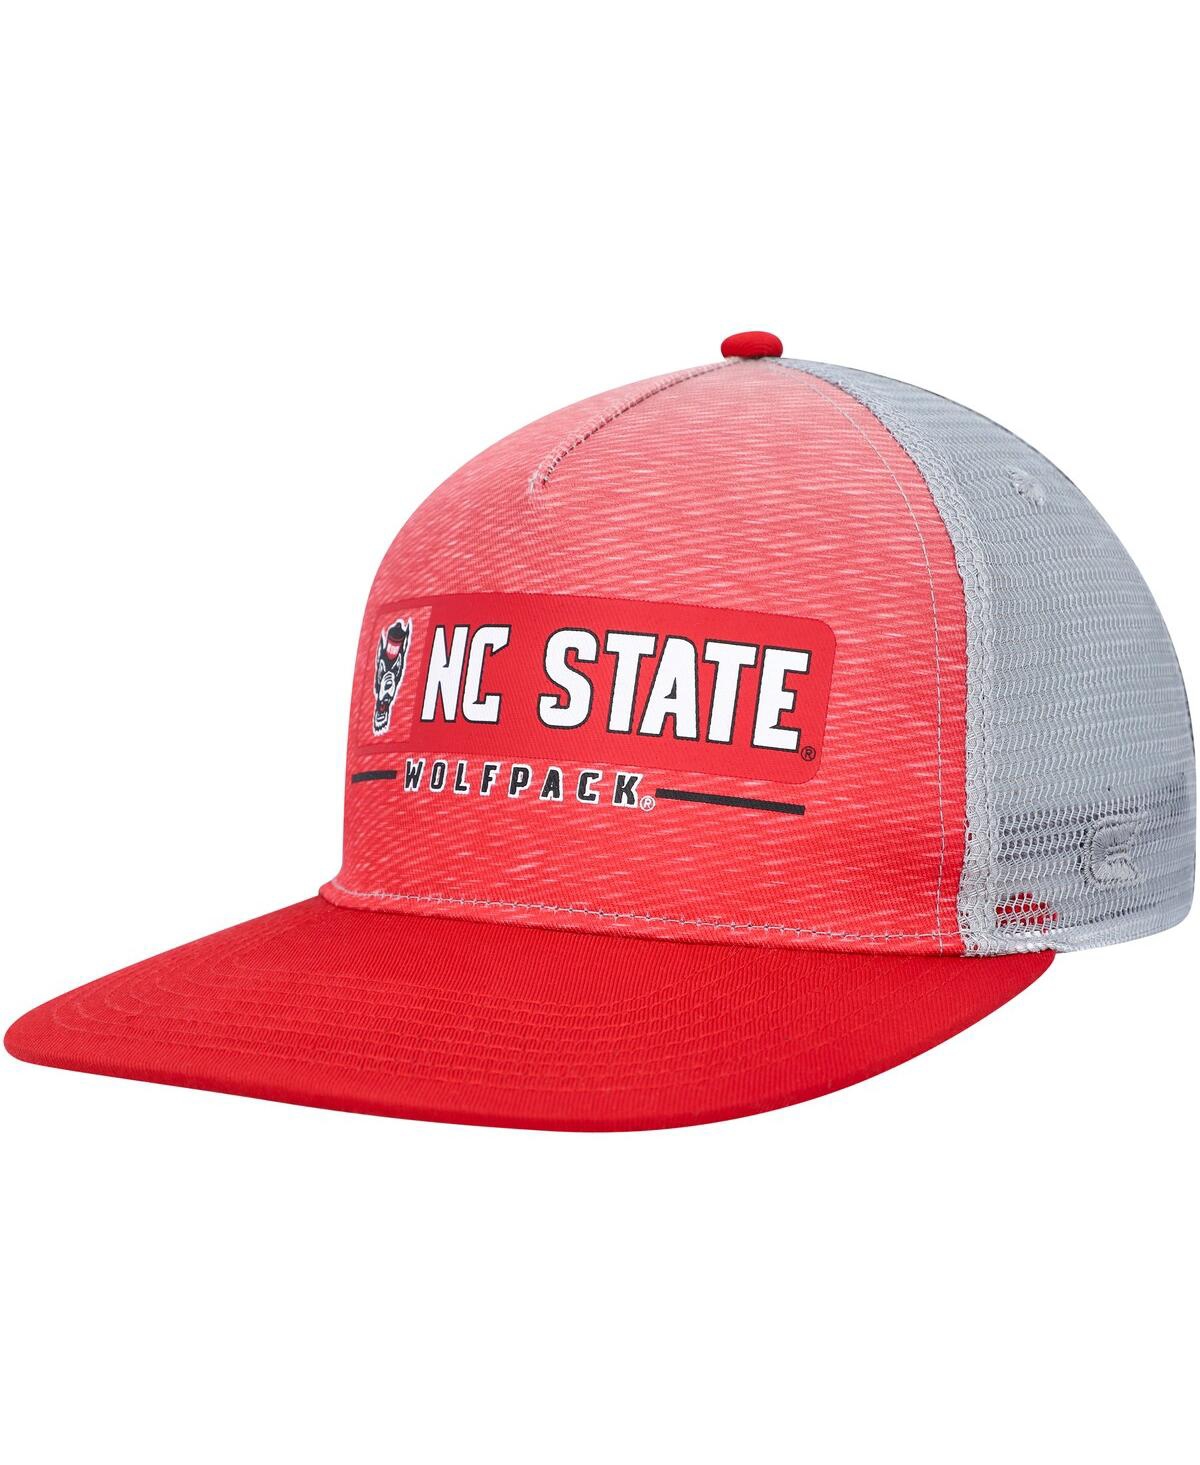 Men's Colosseum Red, Gray Nc State Wolfpack Snapback Hat - Red, Gray